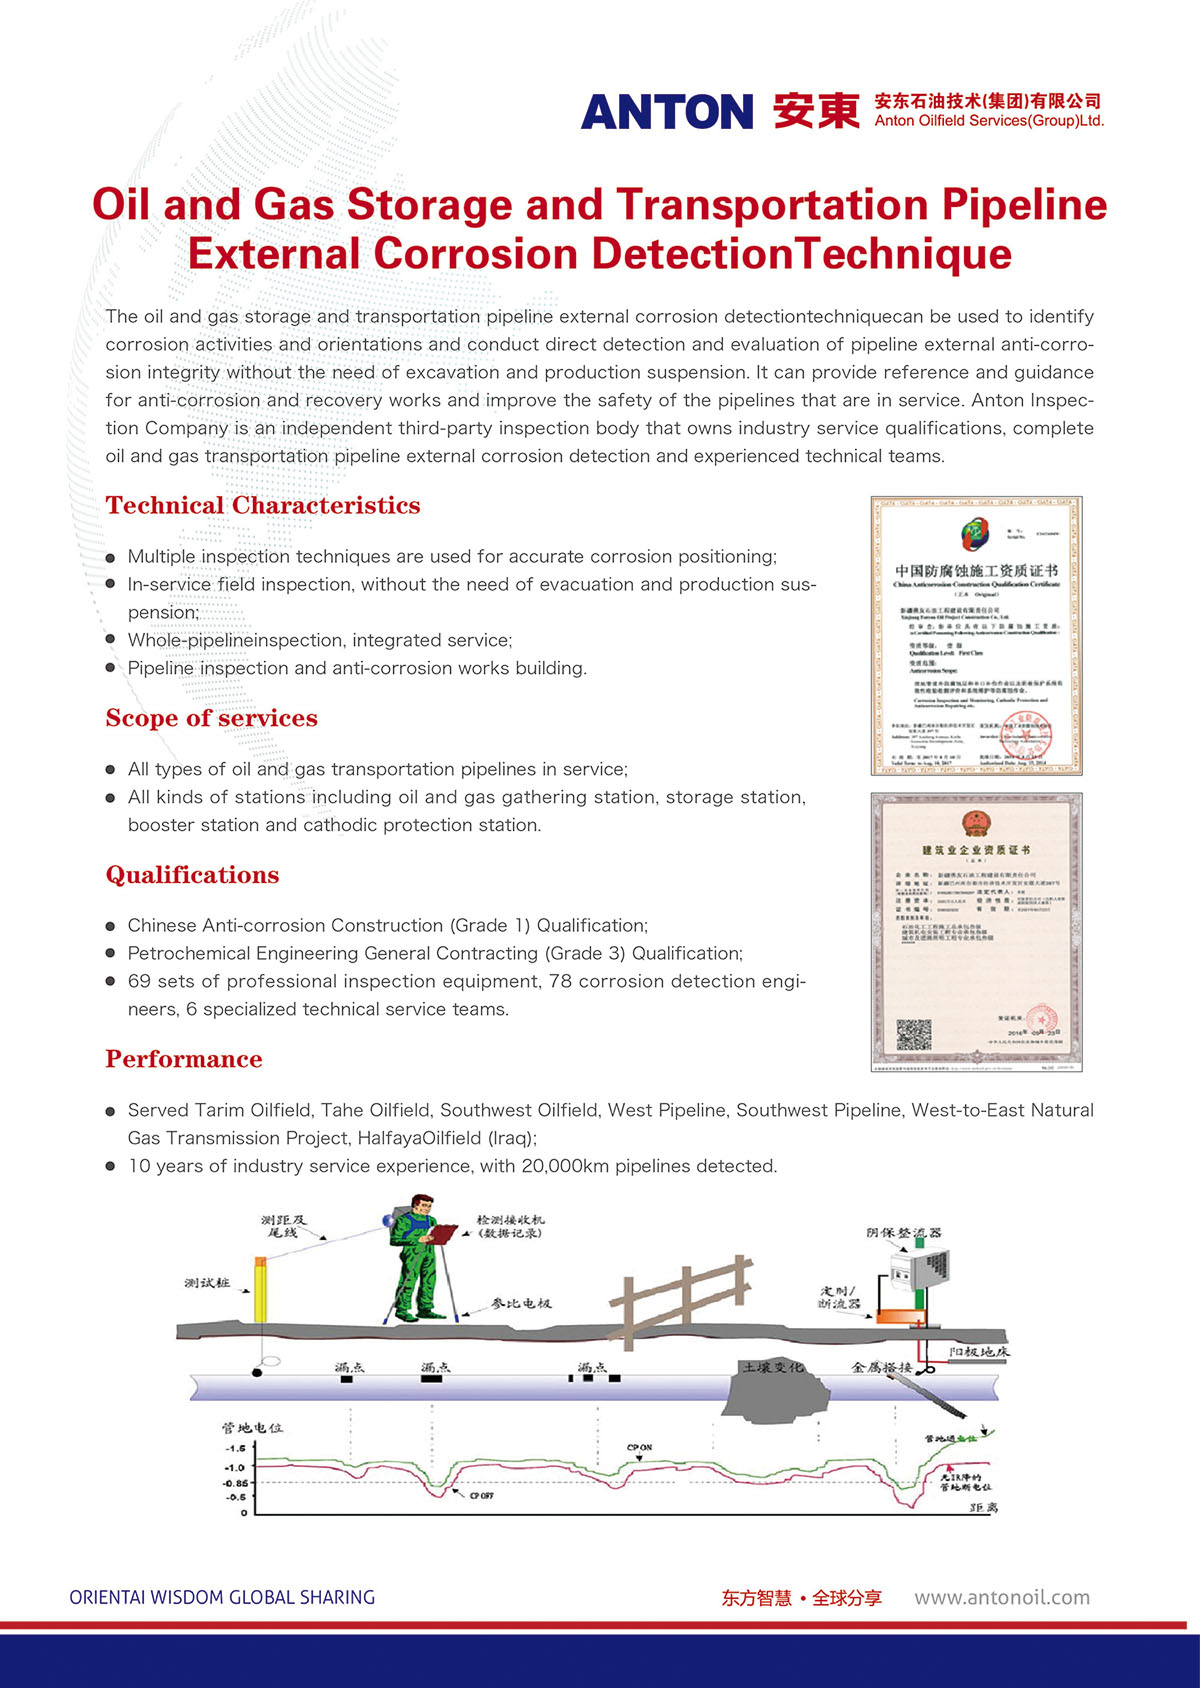 Oil and Gas Storage and Transportation Pipeline External Corrosion Detection Technique